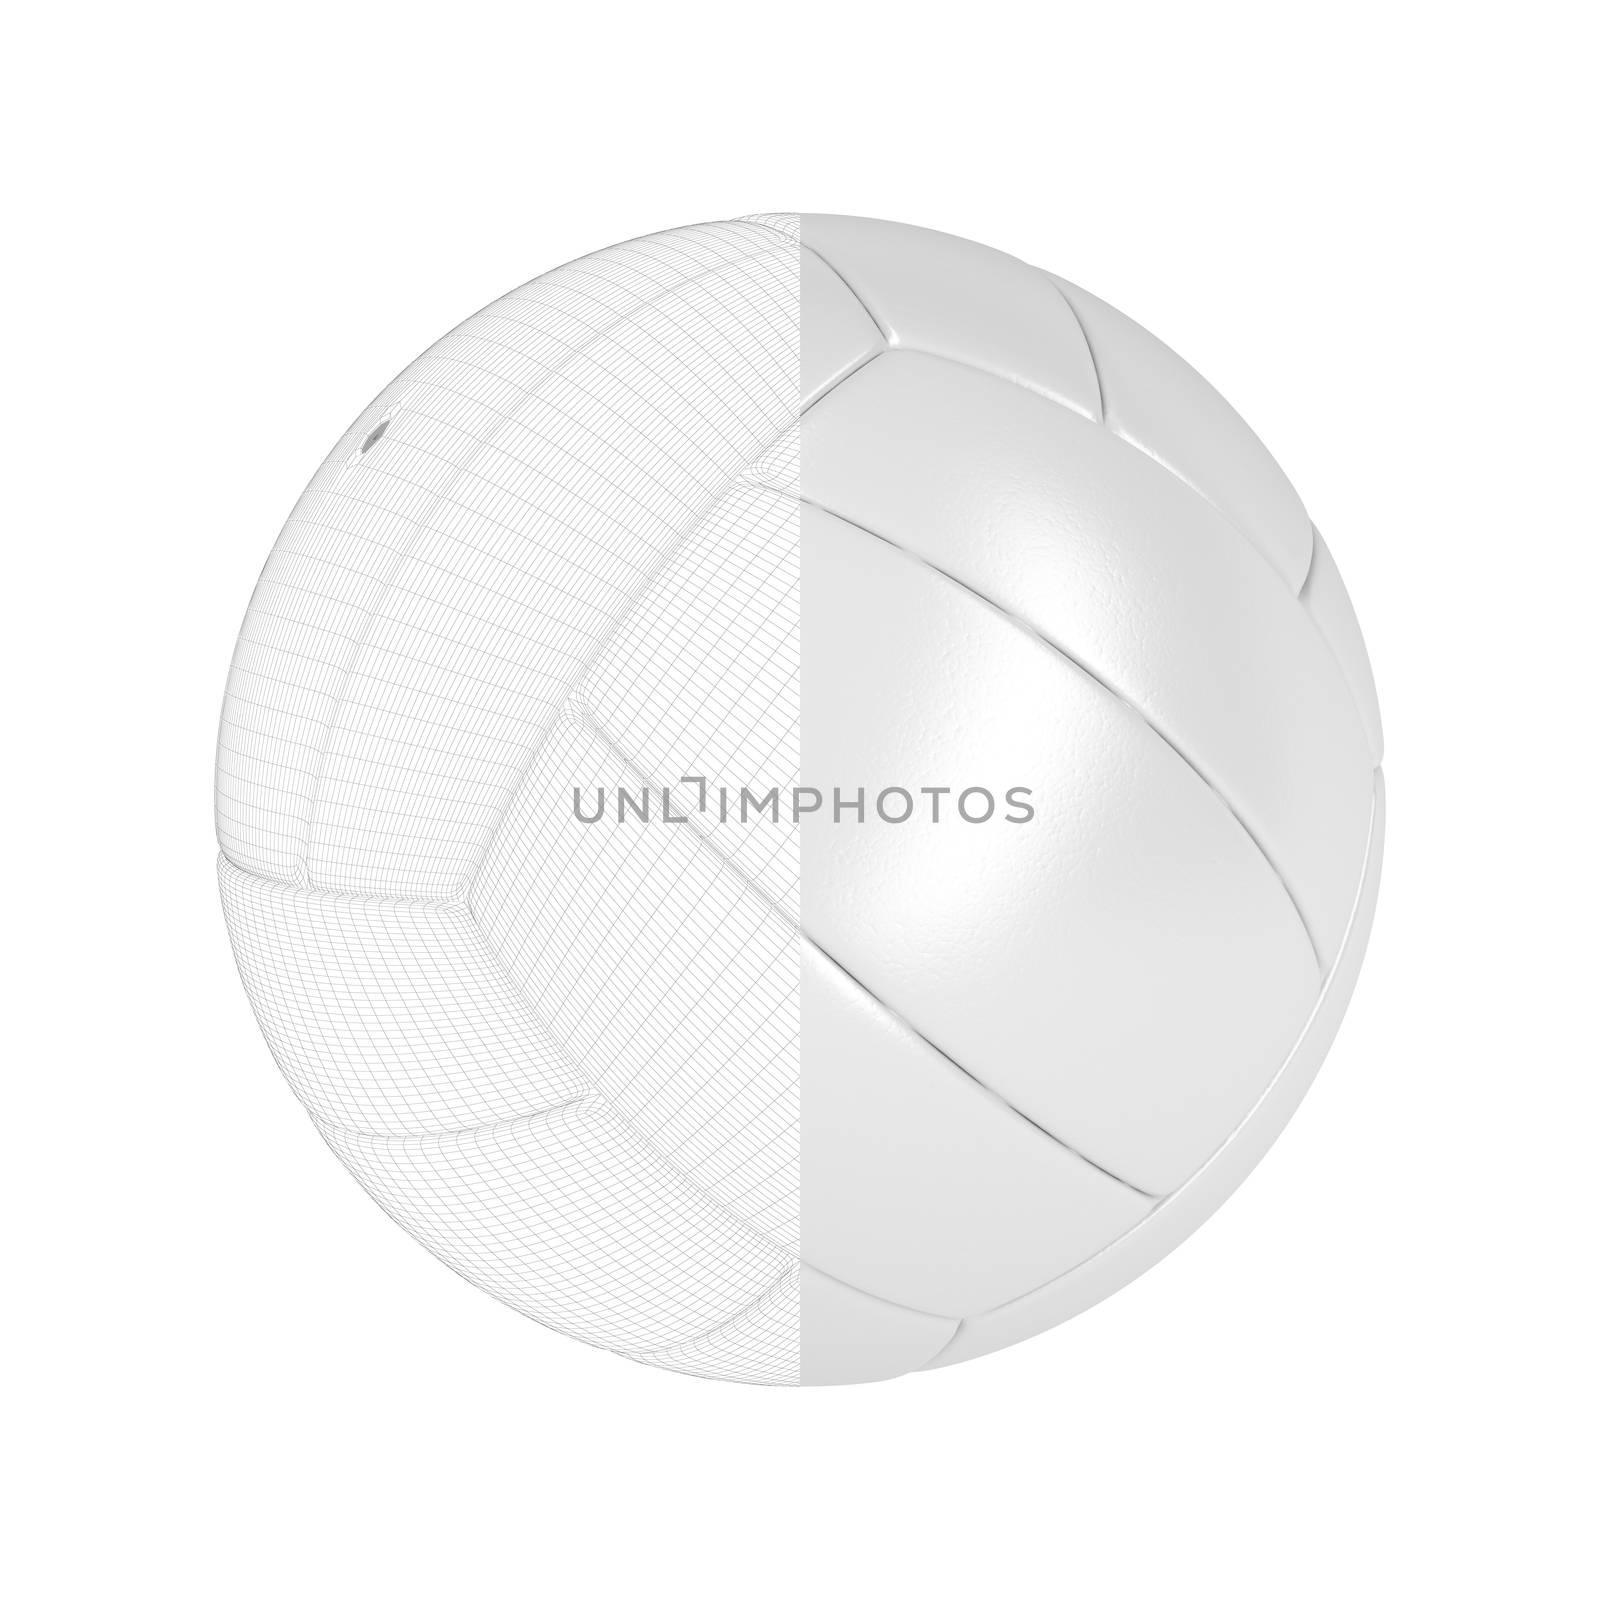 3D model of volleyball ball by magraphics